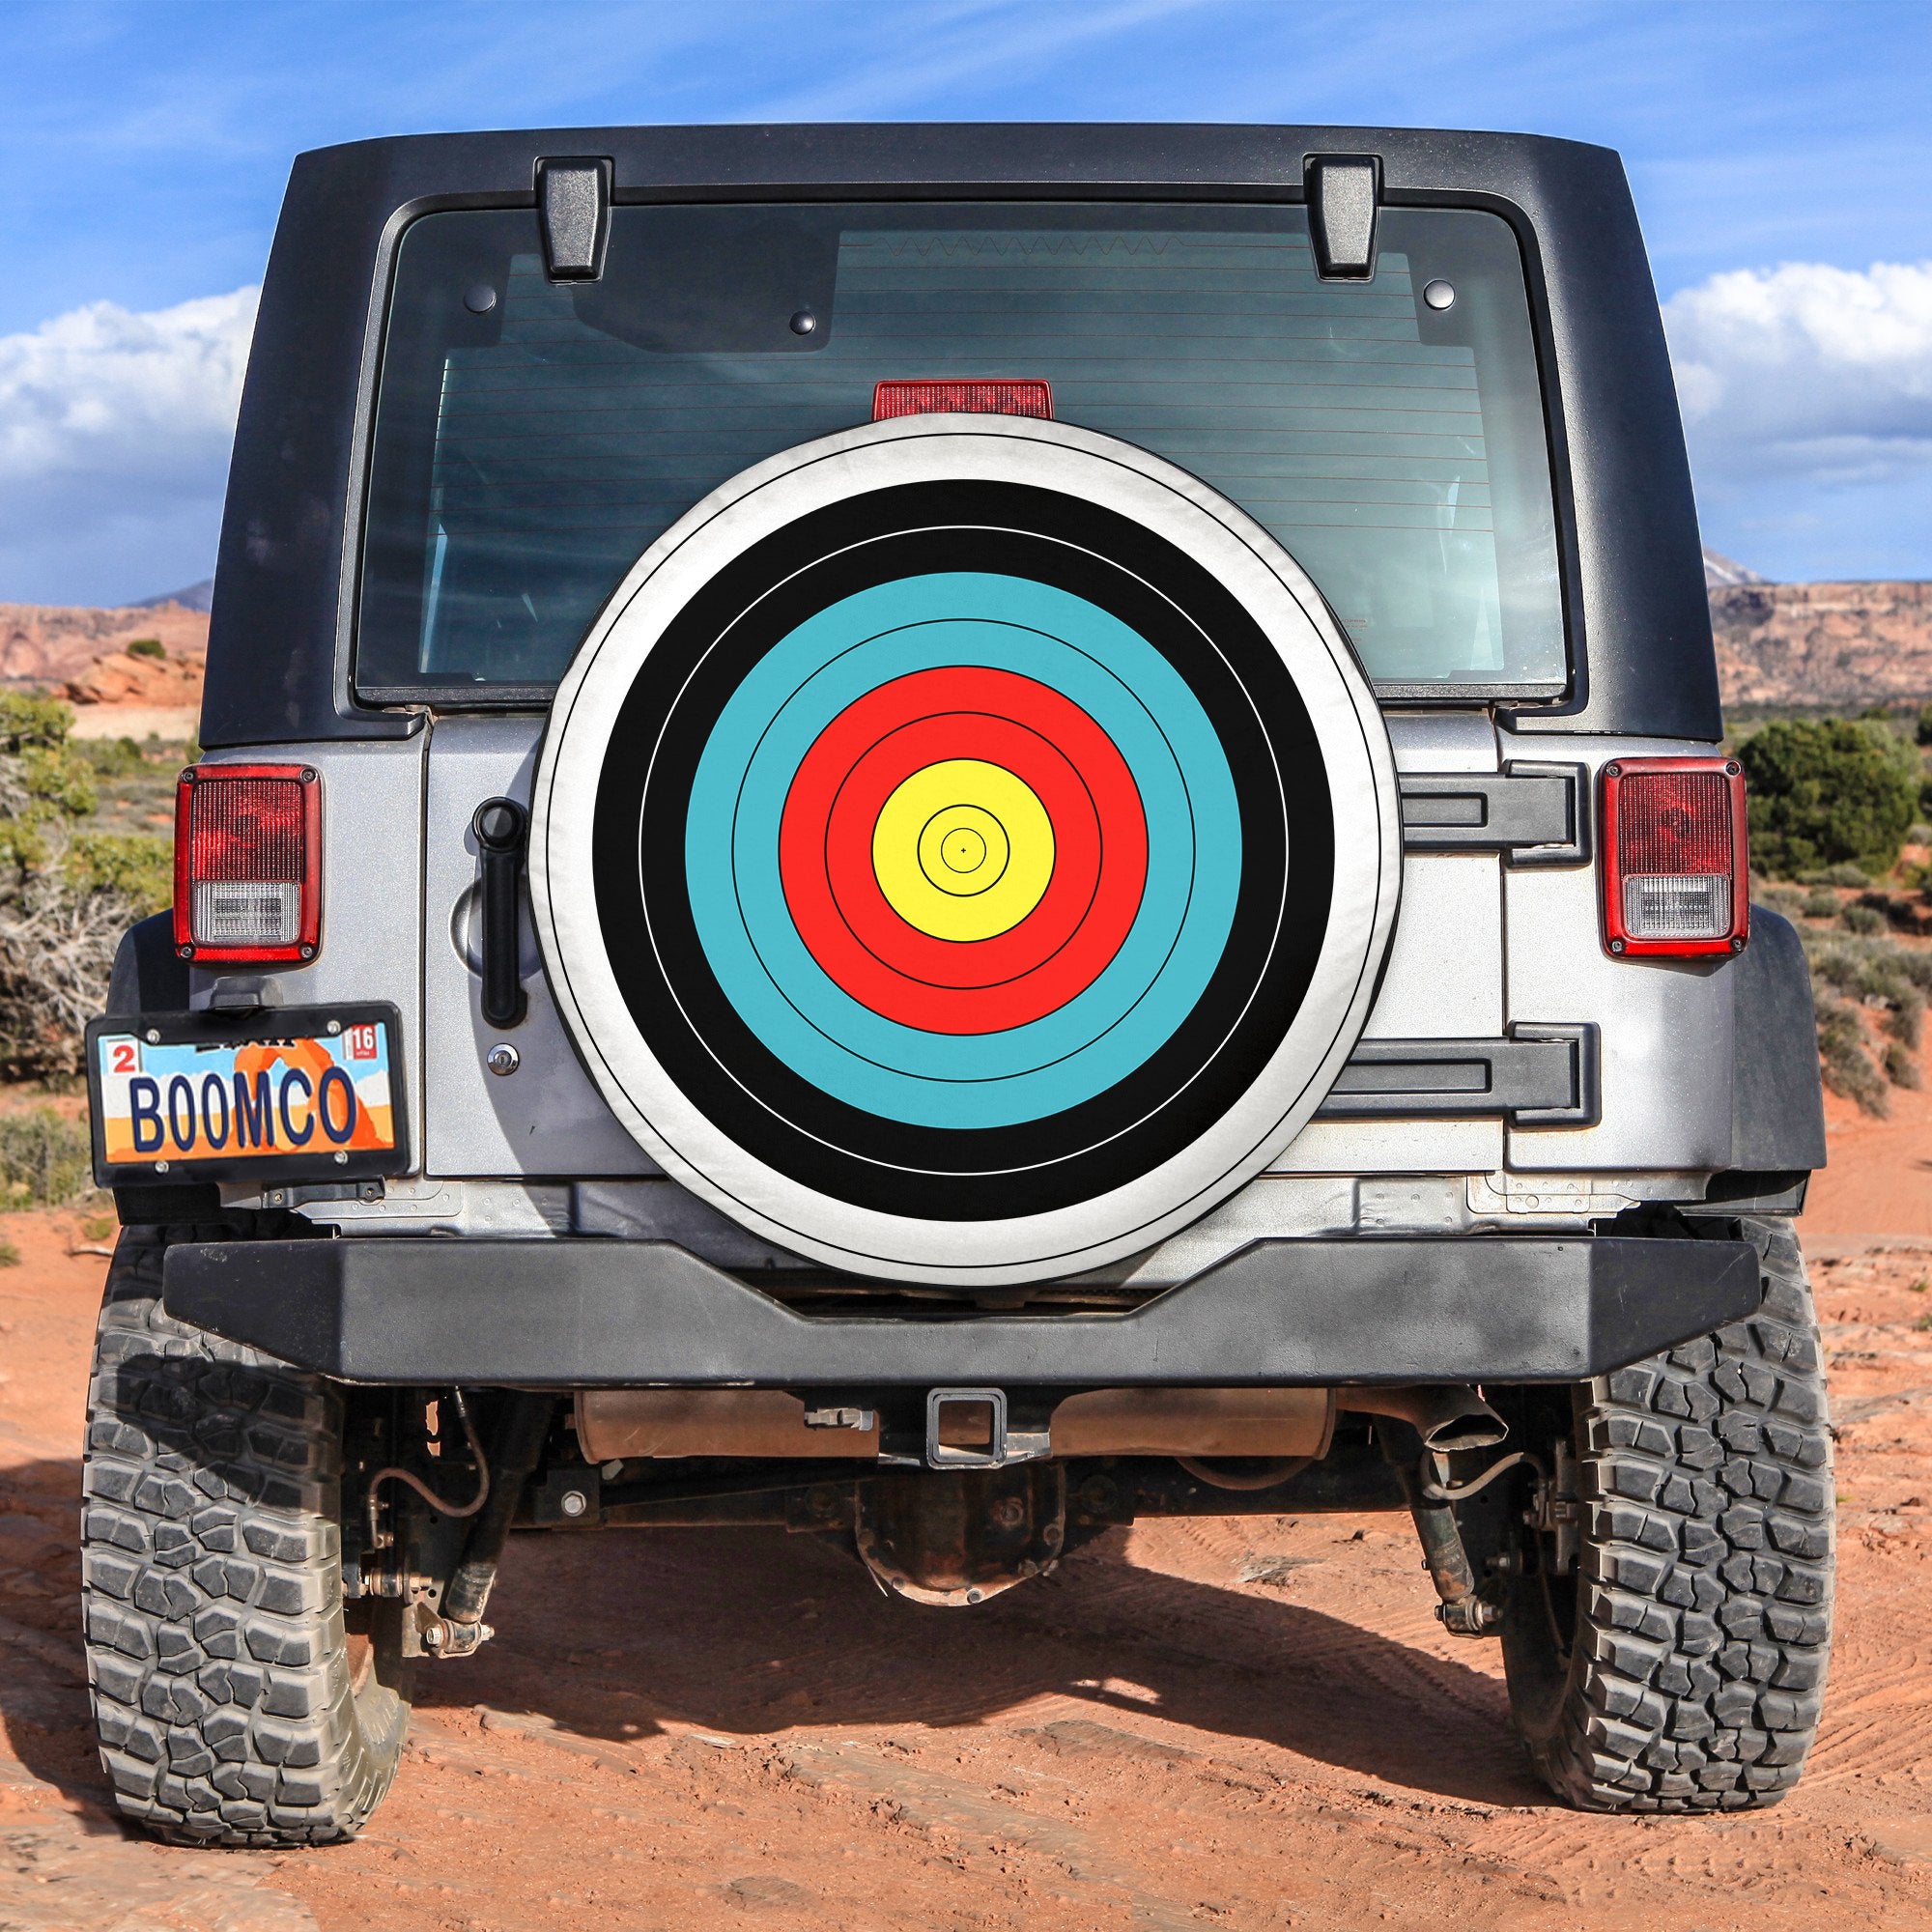 Archery Target Spare Tire Cover Gift For Campers Nearkii